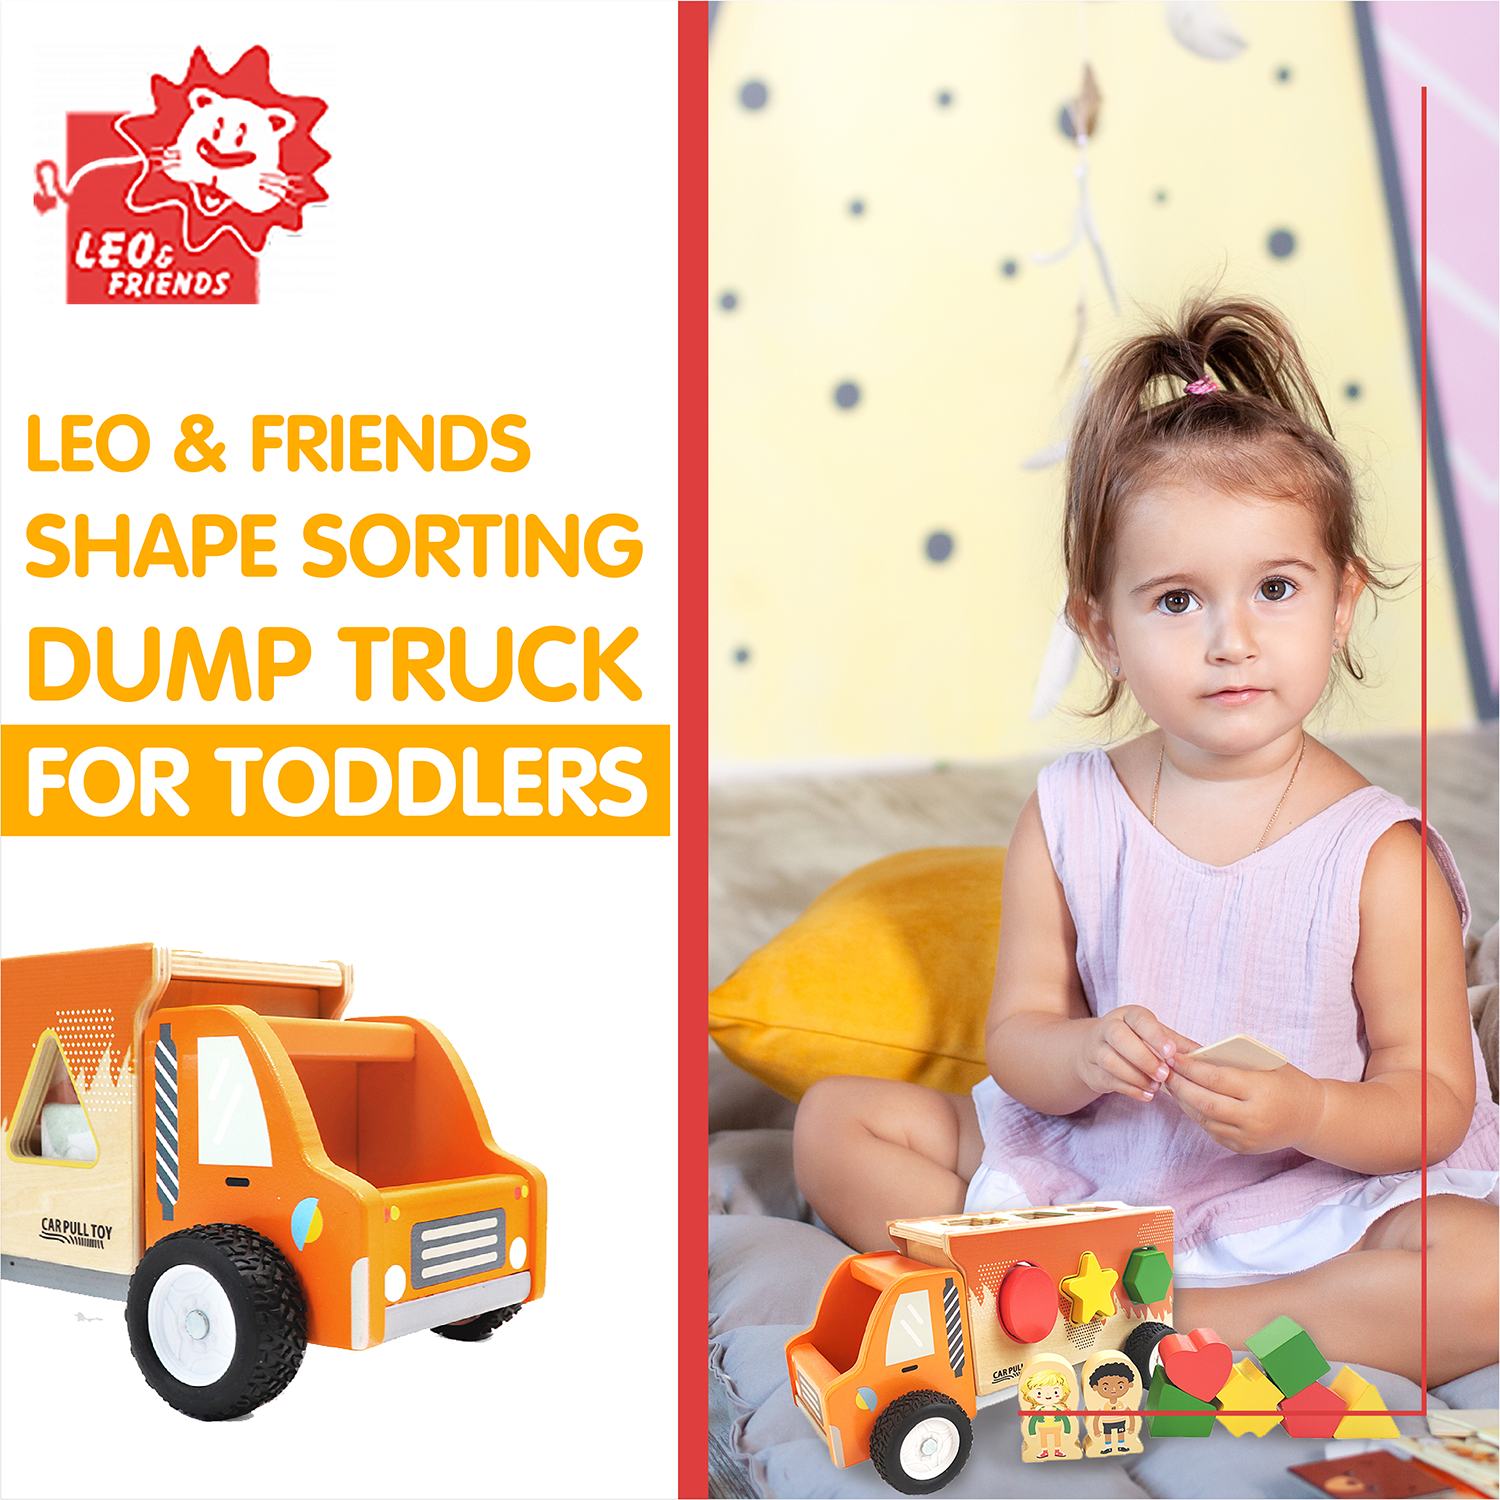 Leo & Friends Shapes & Colors Sorting Dump Truck for Toddlers - image 4 of 8